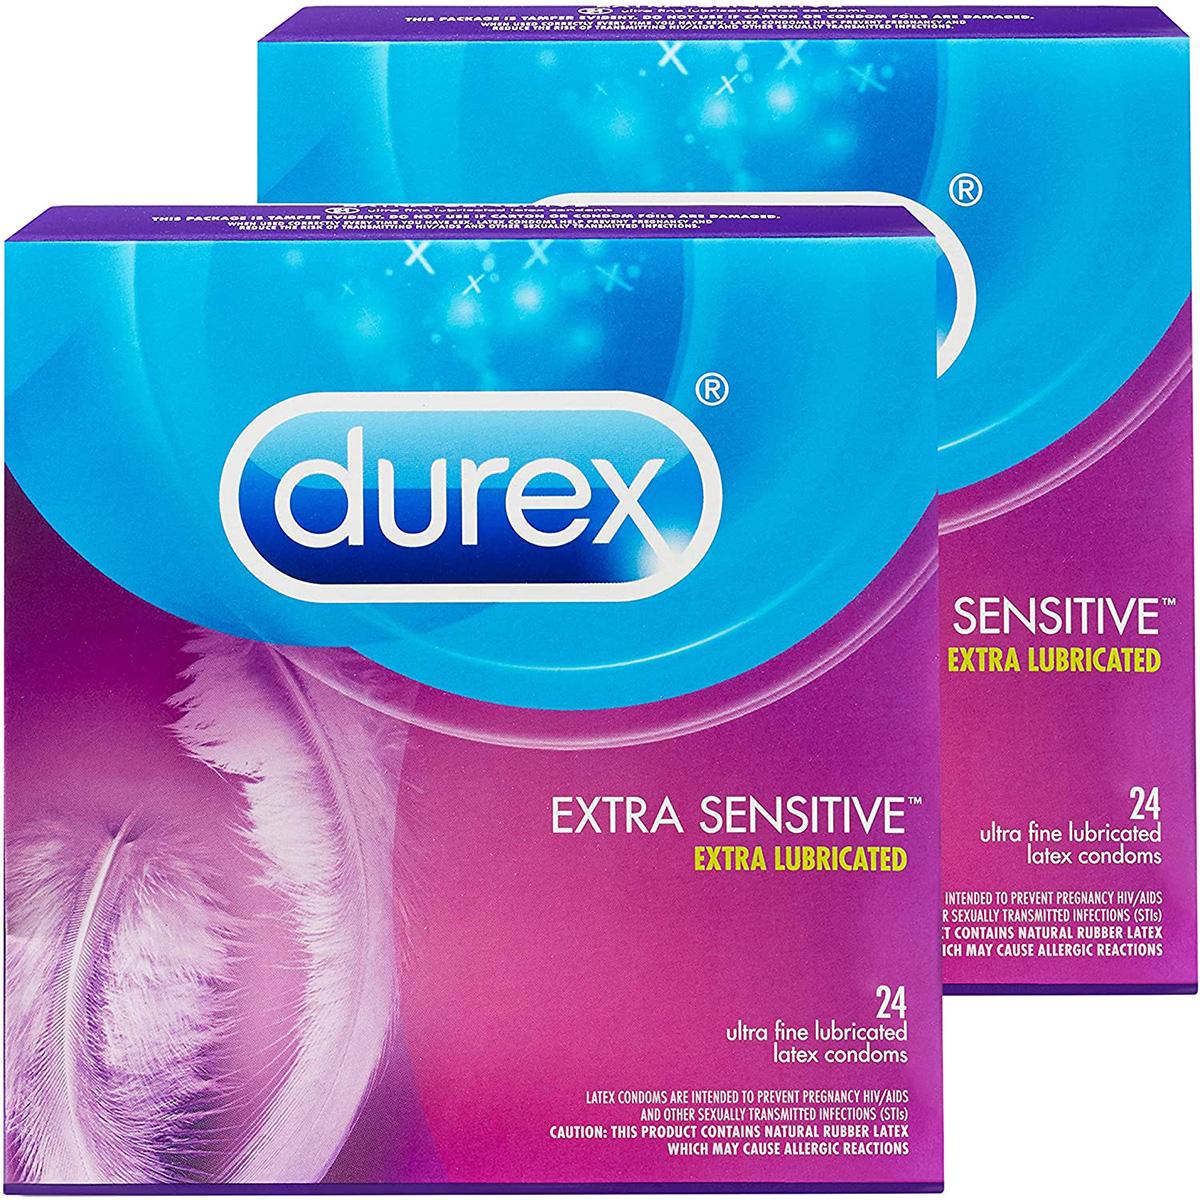 24 Durex Extra Sensitive and Extra Lubricated Condoms for $9.29 Shipped